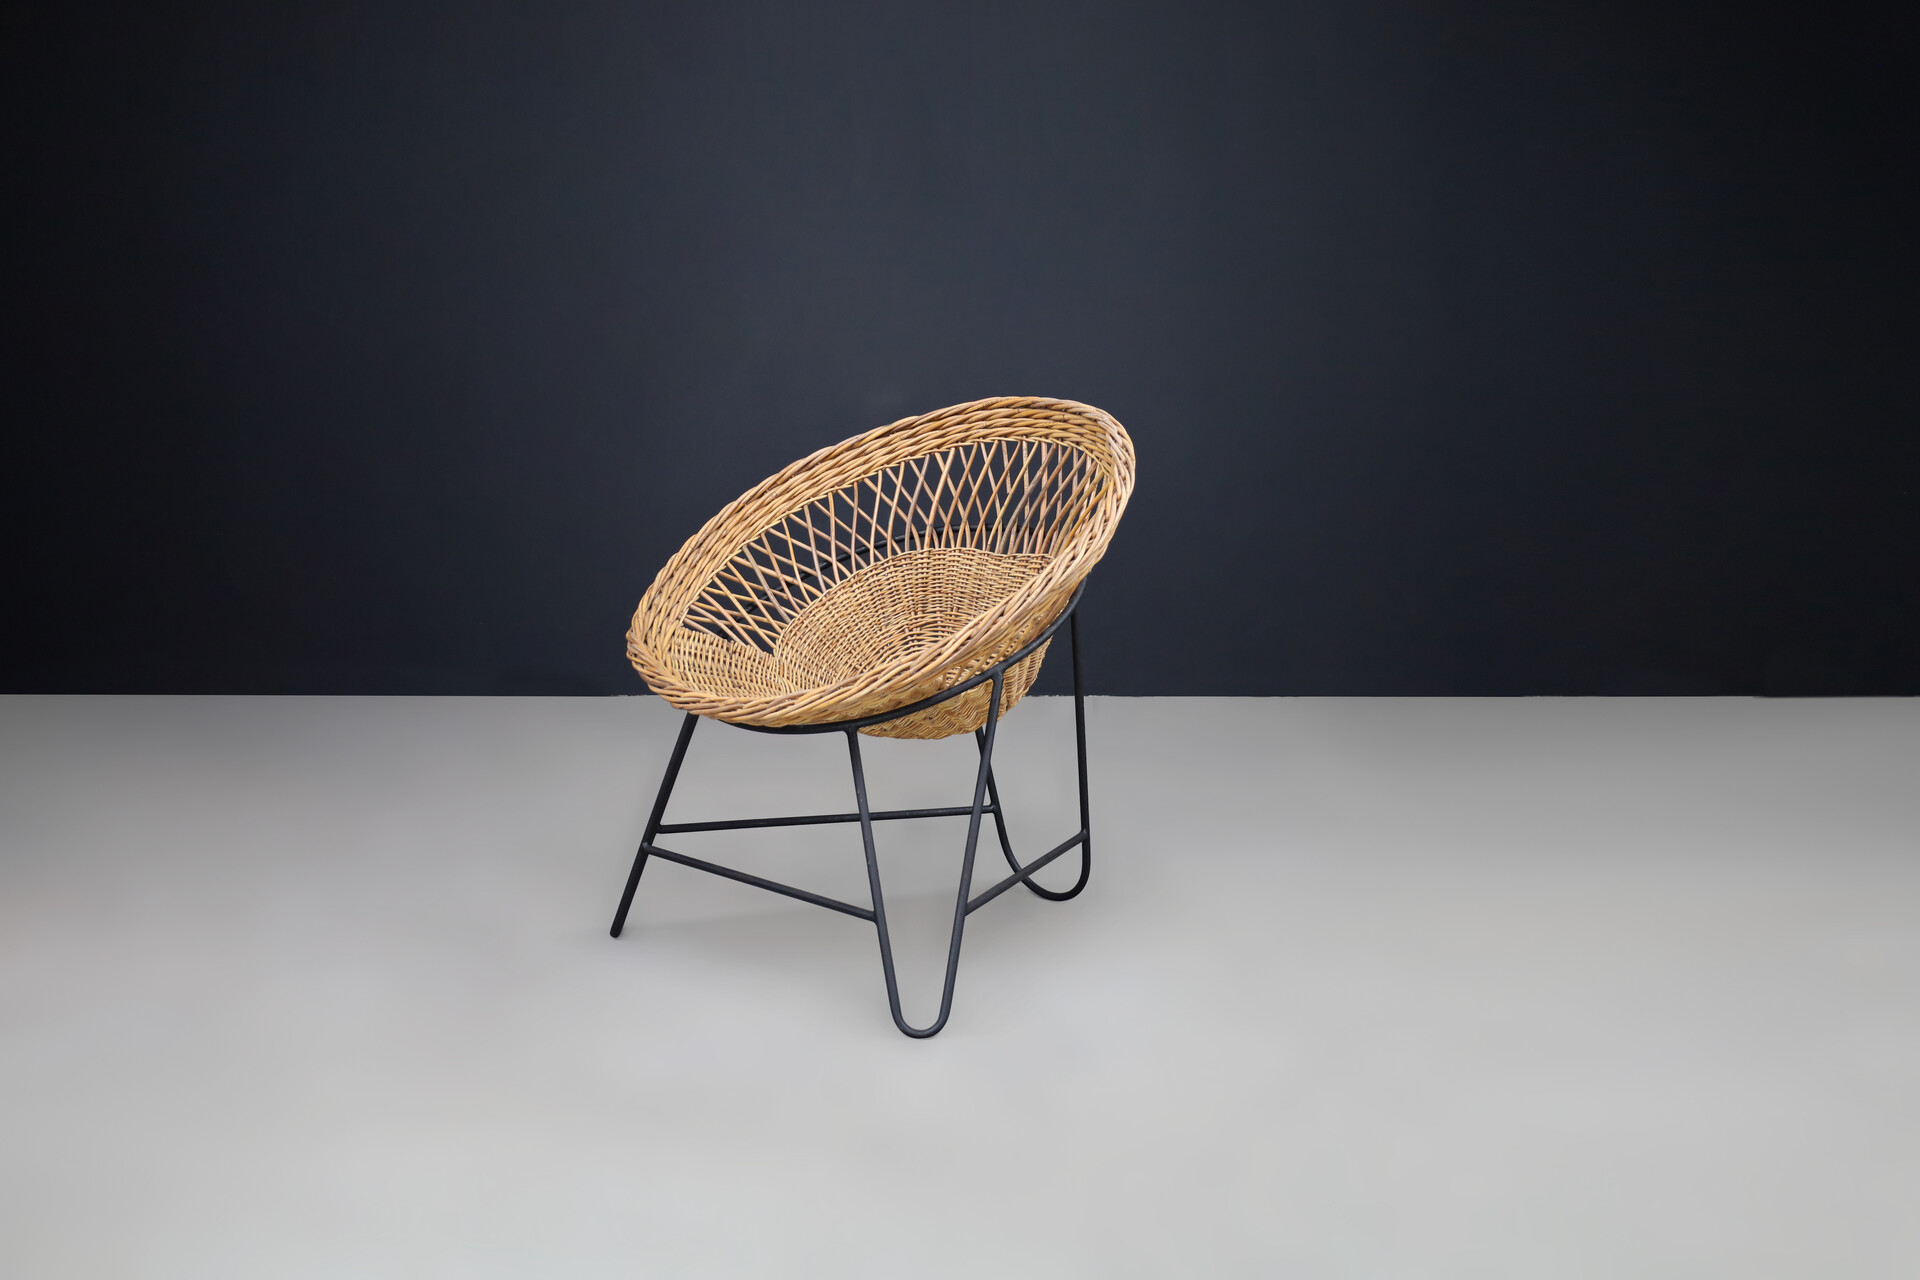 Mid century modern Wicker and black frame Lounge basket chair, France 1950s Mid-20th century